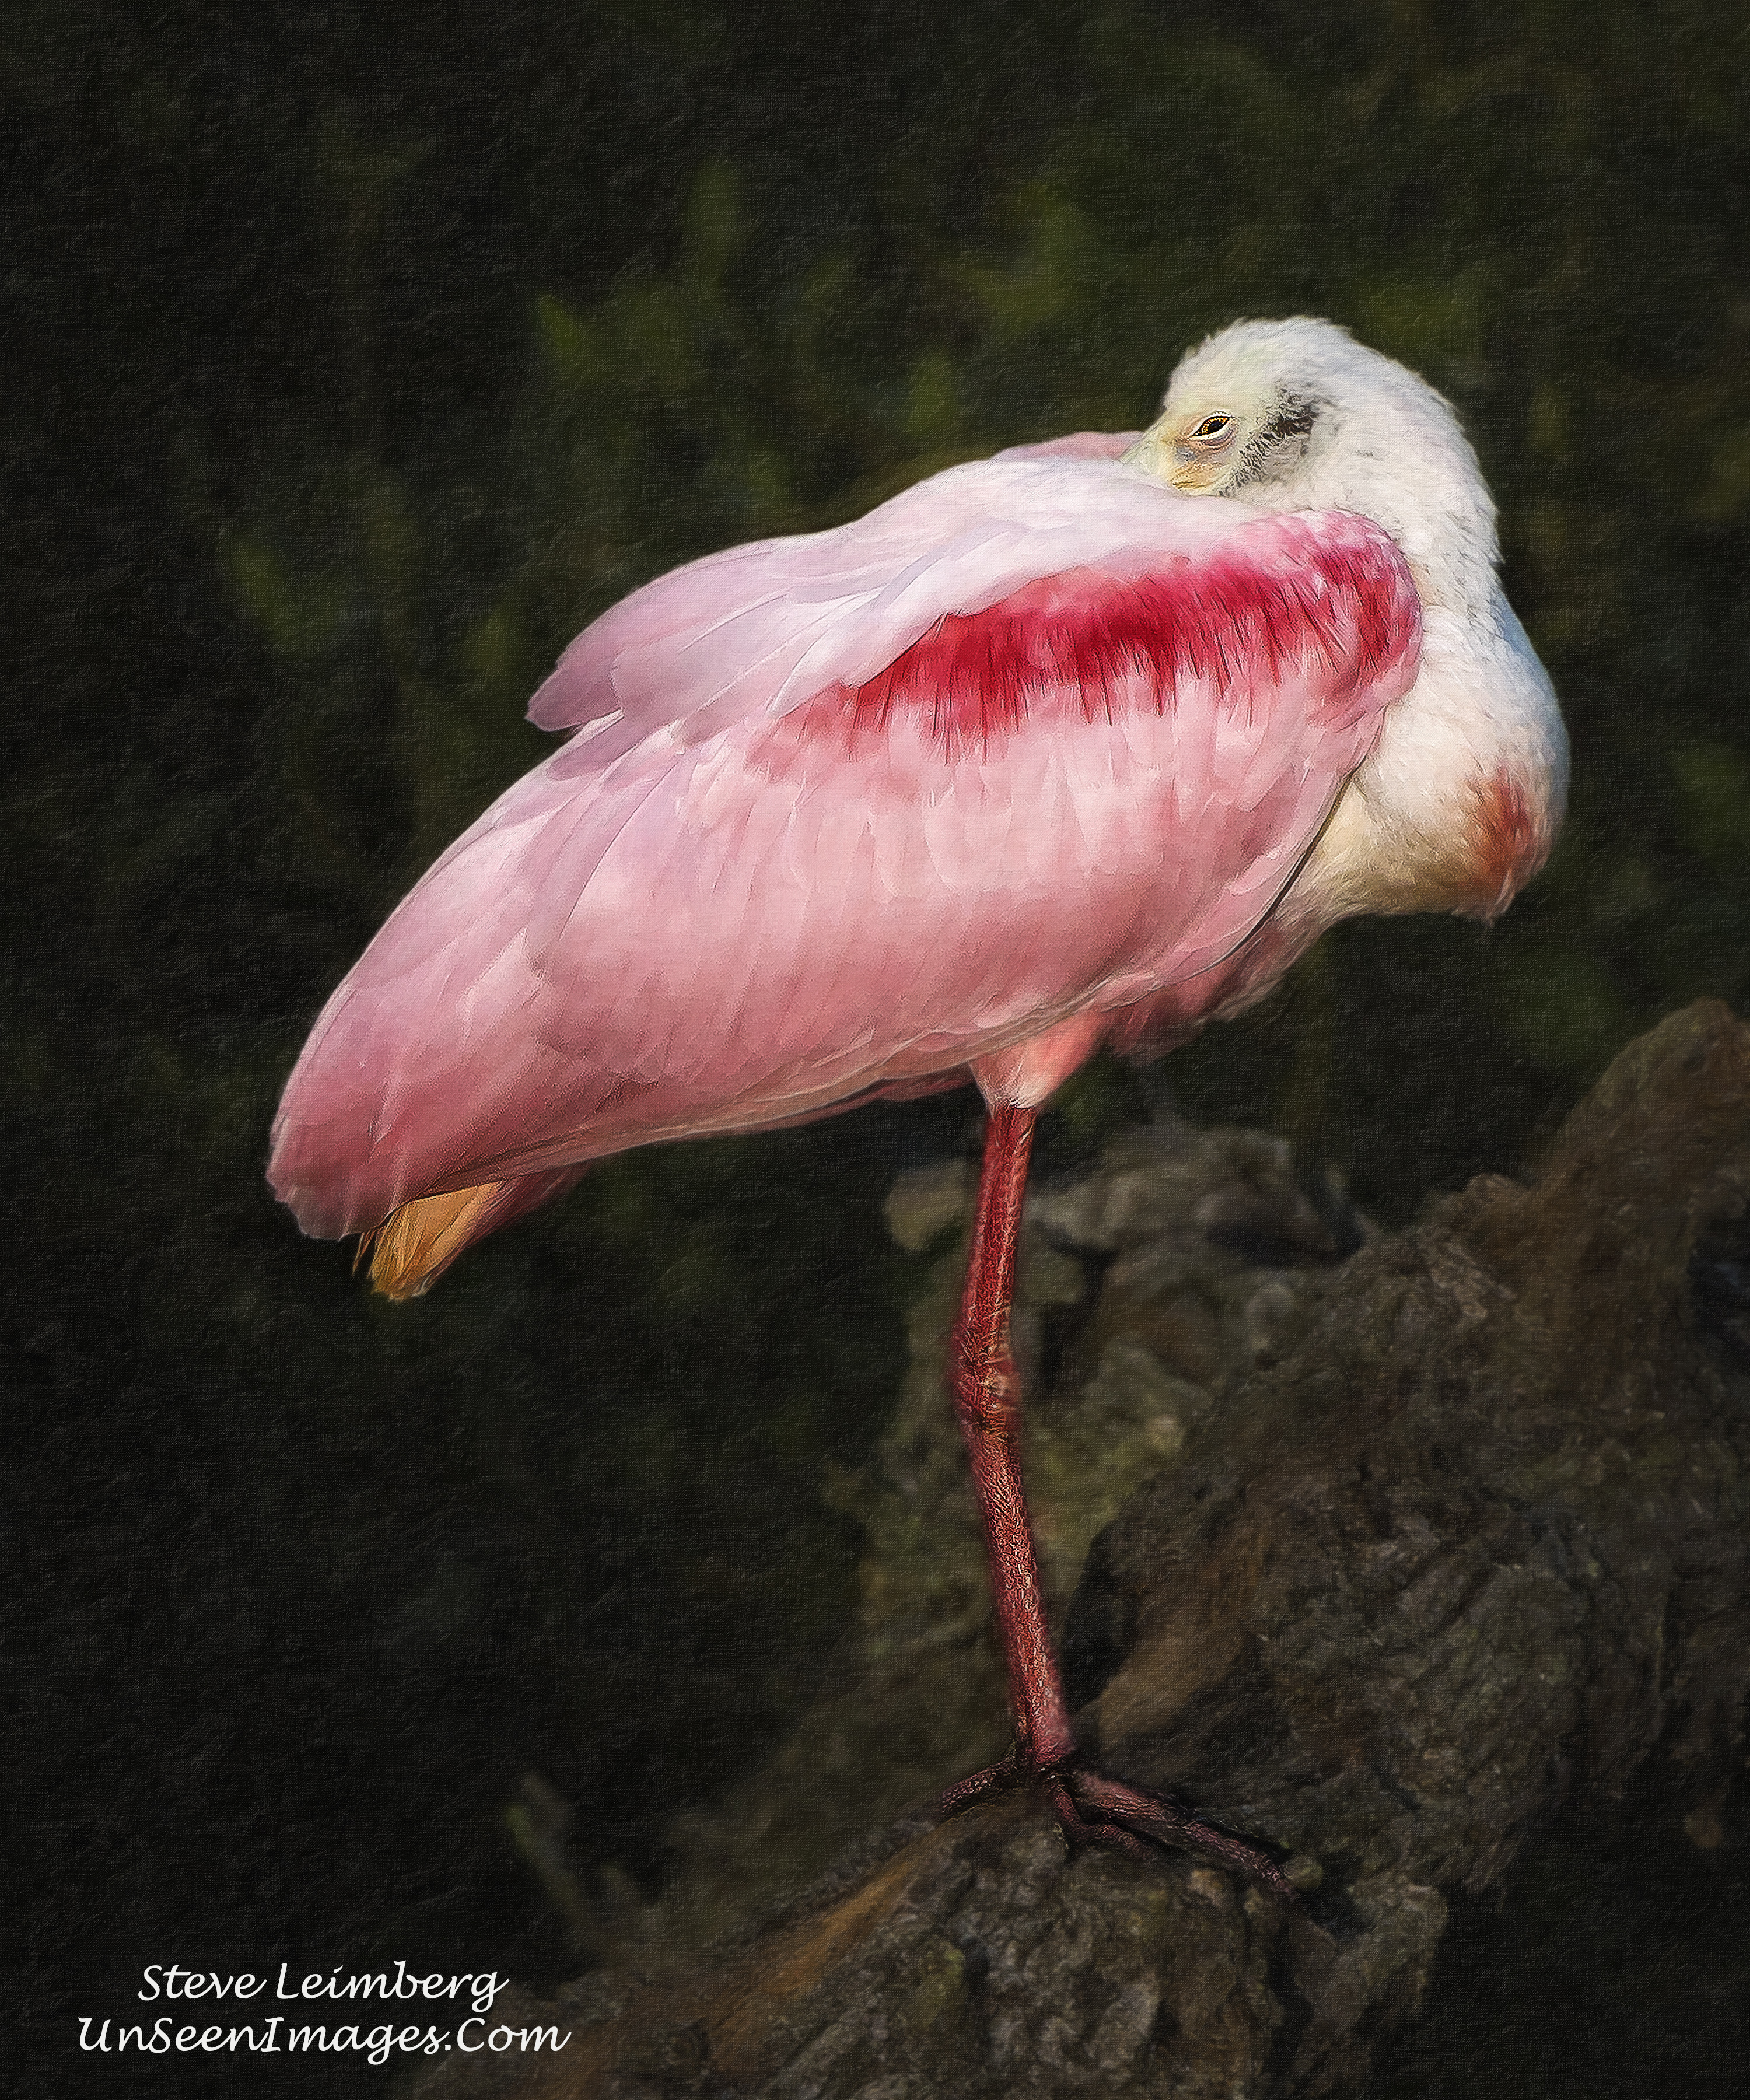 Roseate Spoonbill in Repose Painting/photo by Steve Leimberg, Unseen Images.com